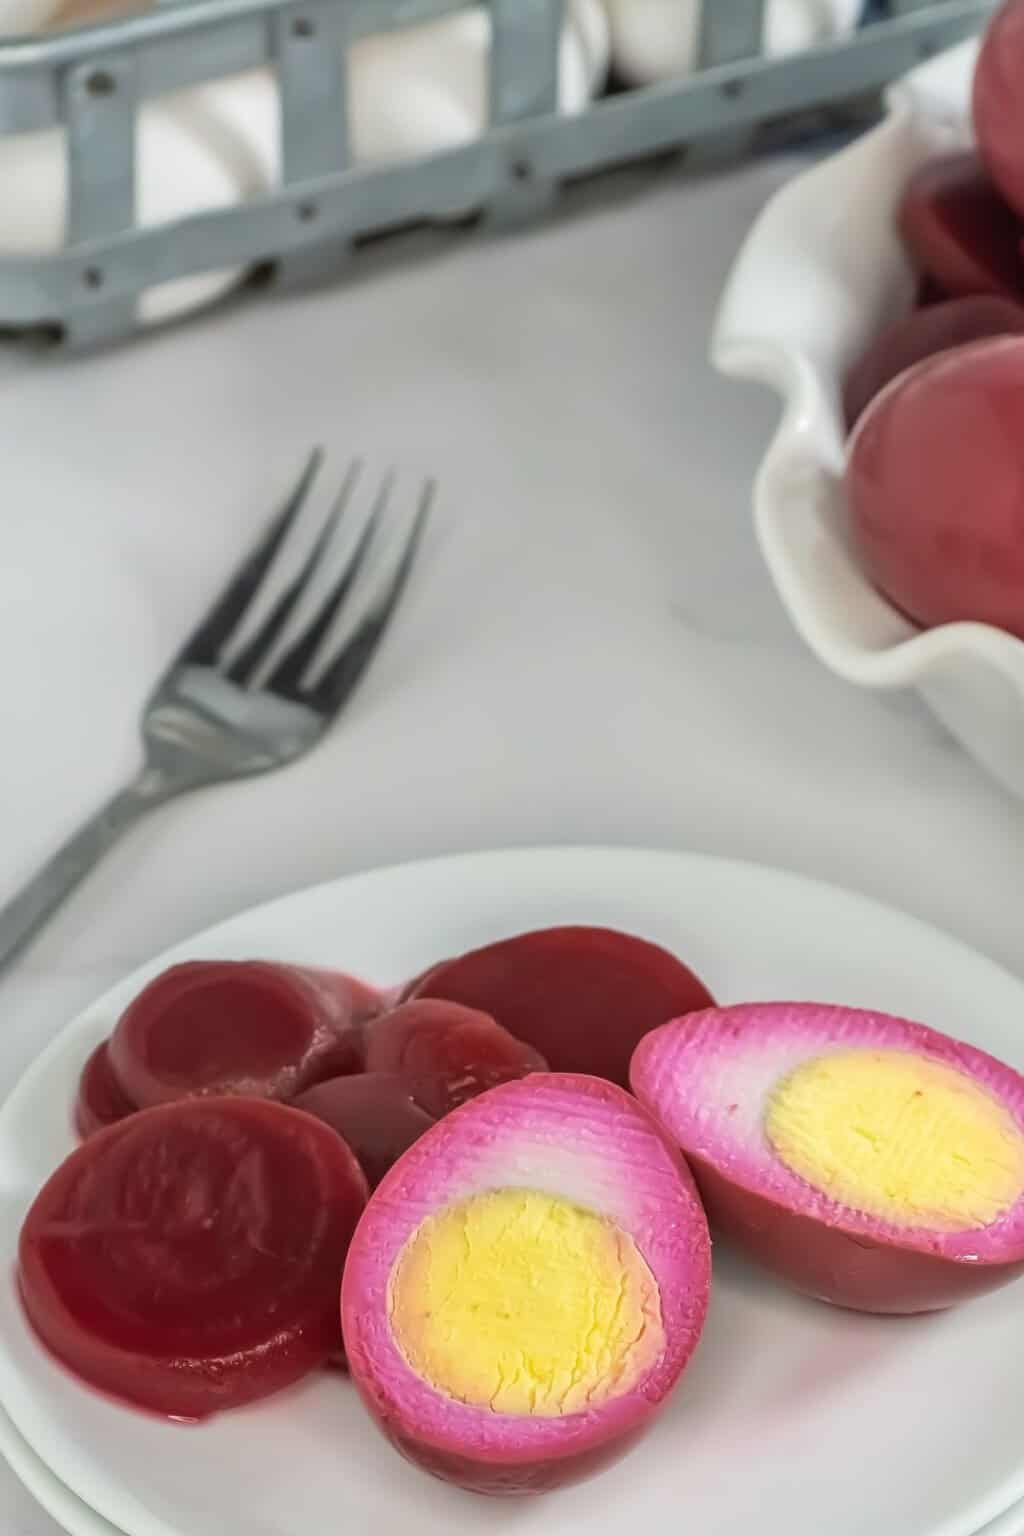 Red eggs served on a white plate, cut in half.